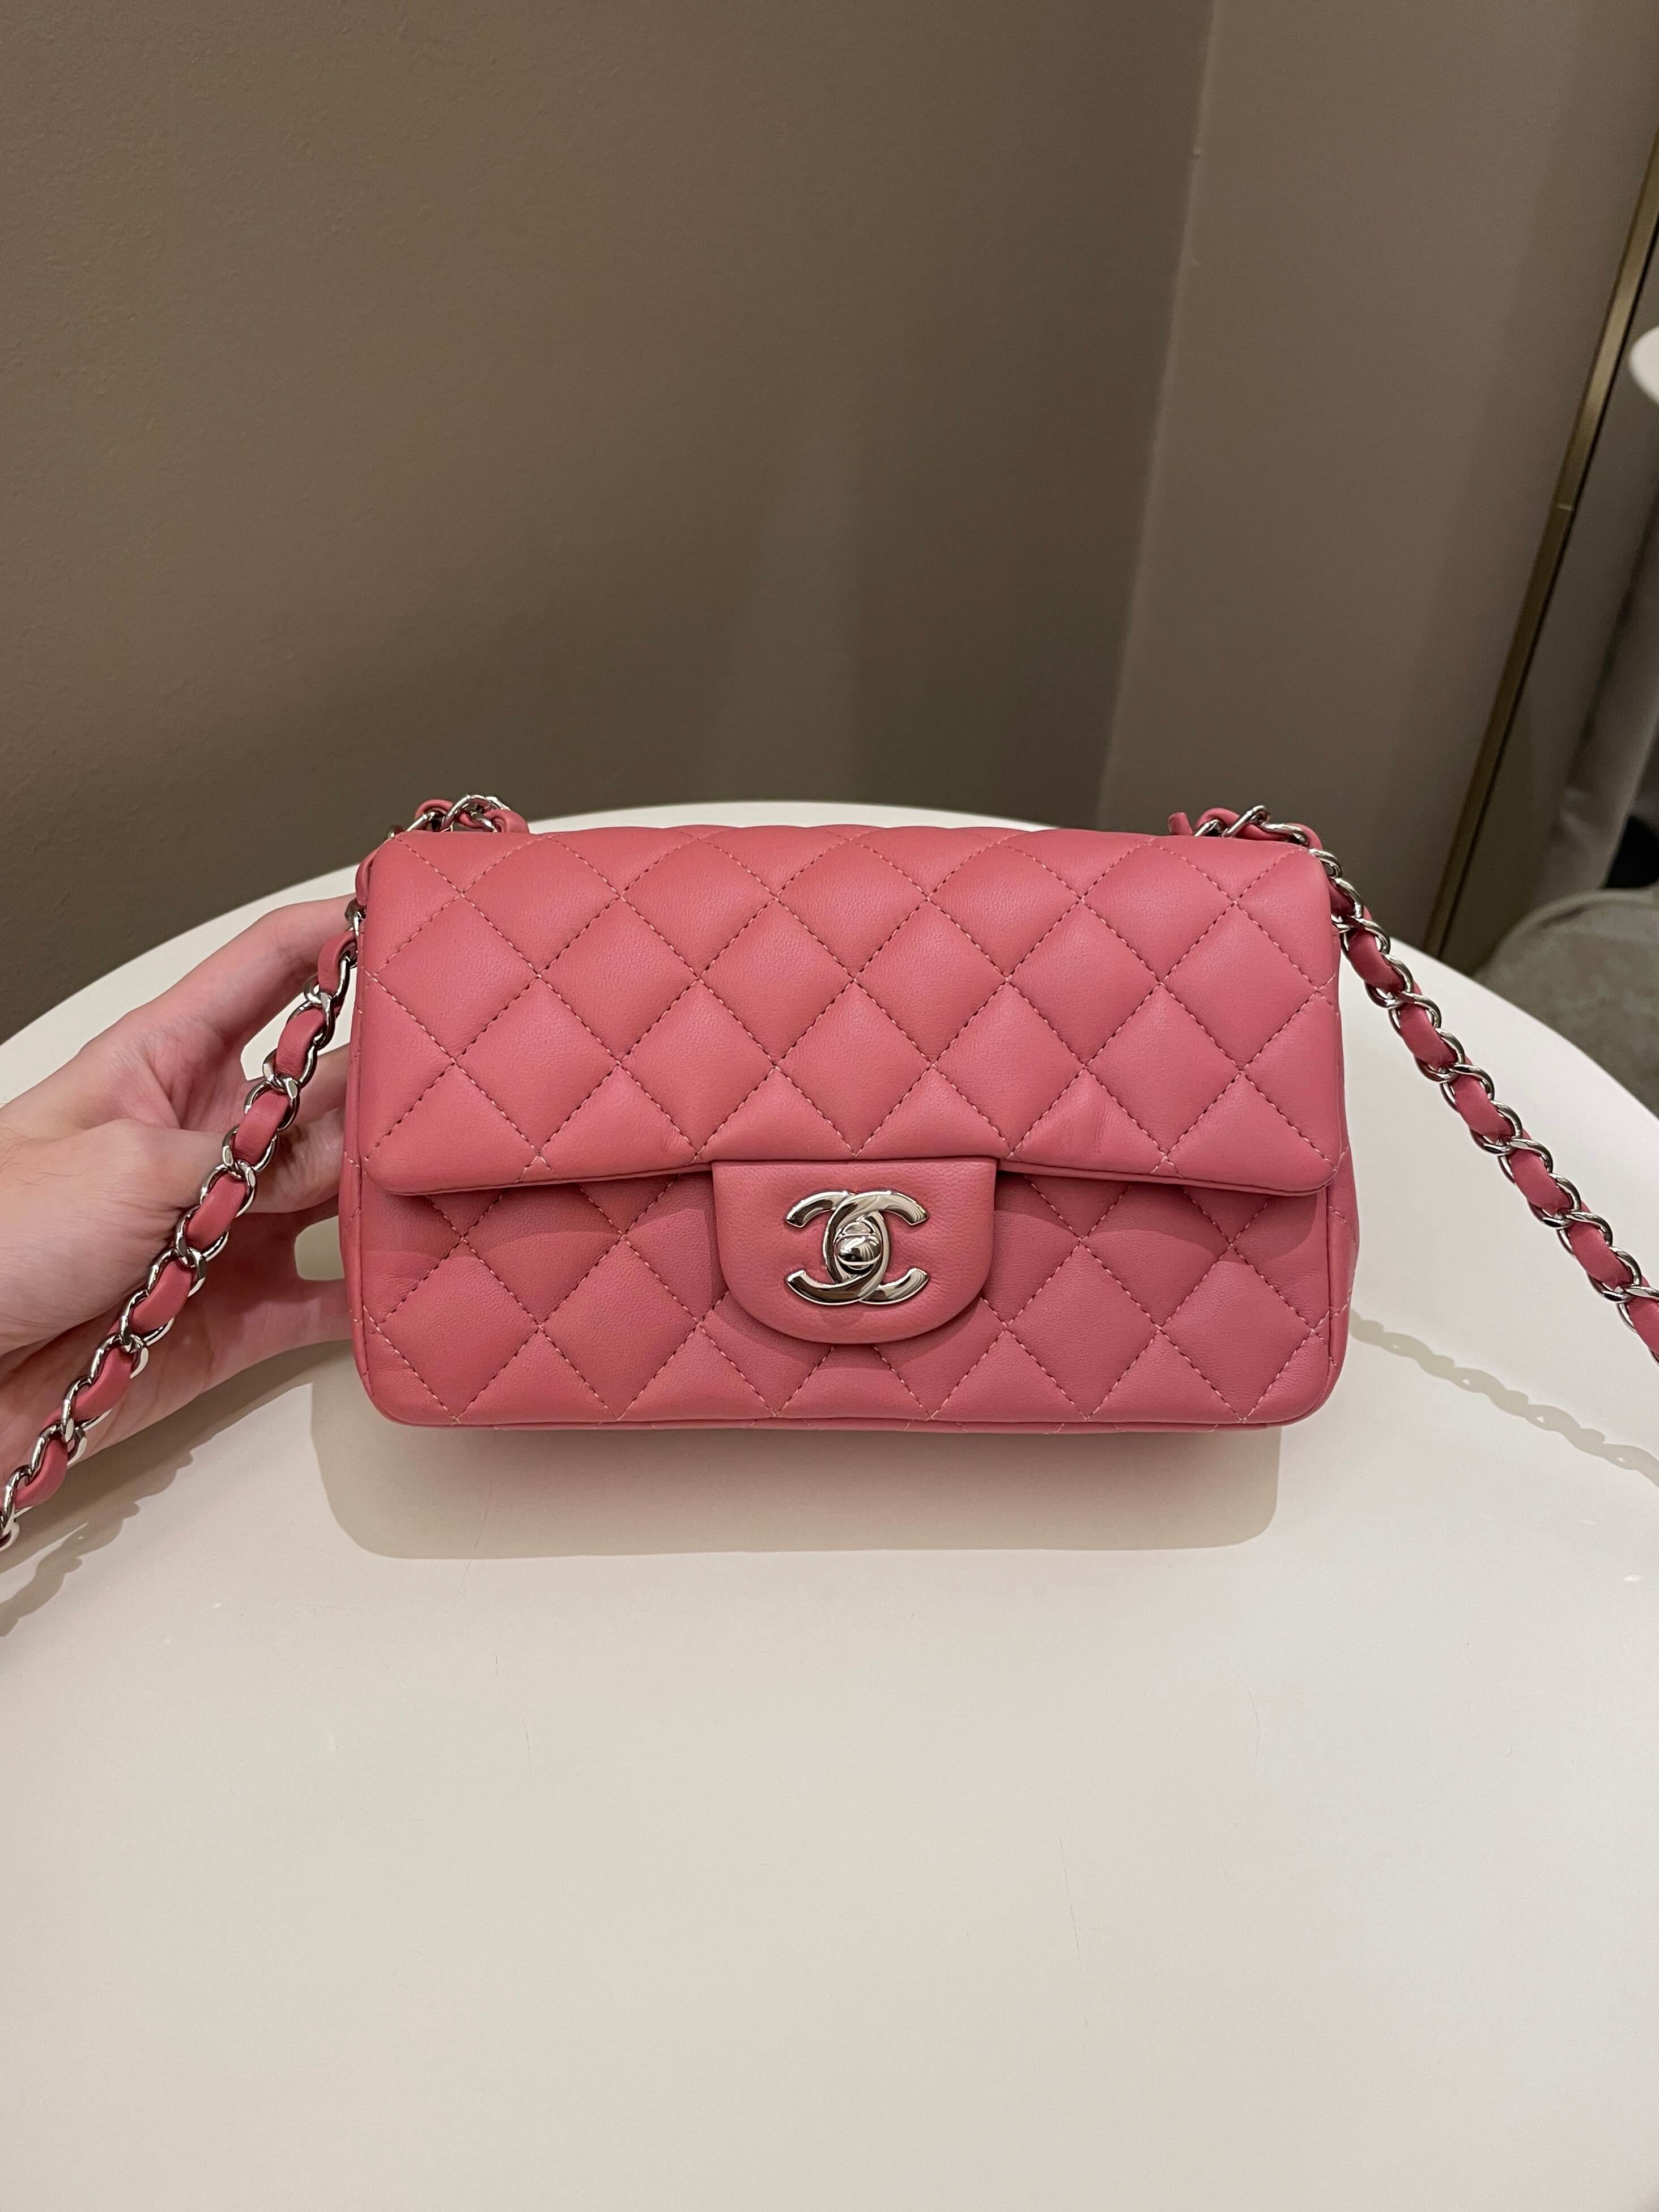 Chanel Classic Quilted Mini Rectangular Mauve Pink Lambskin